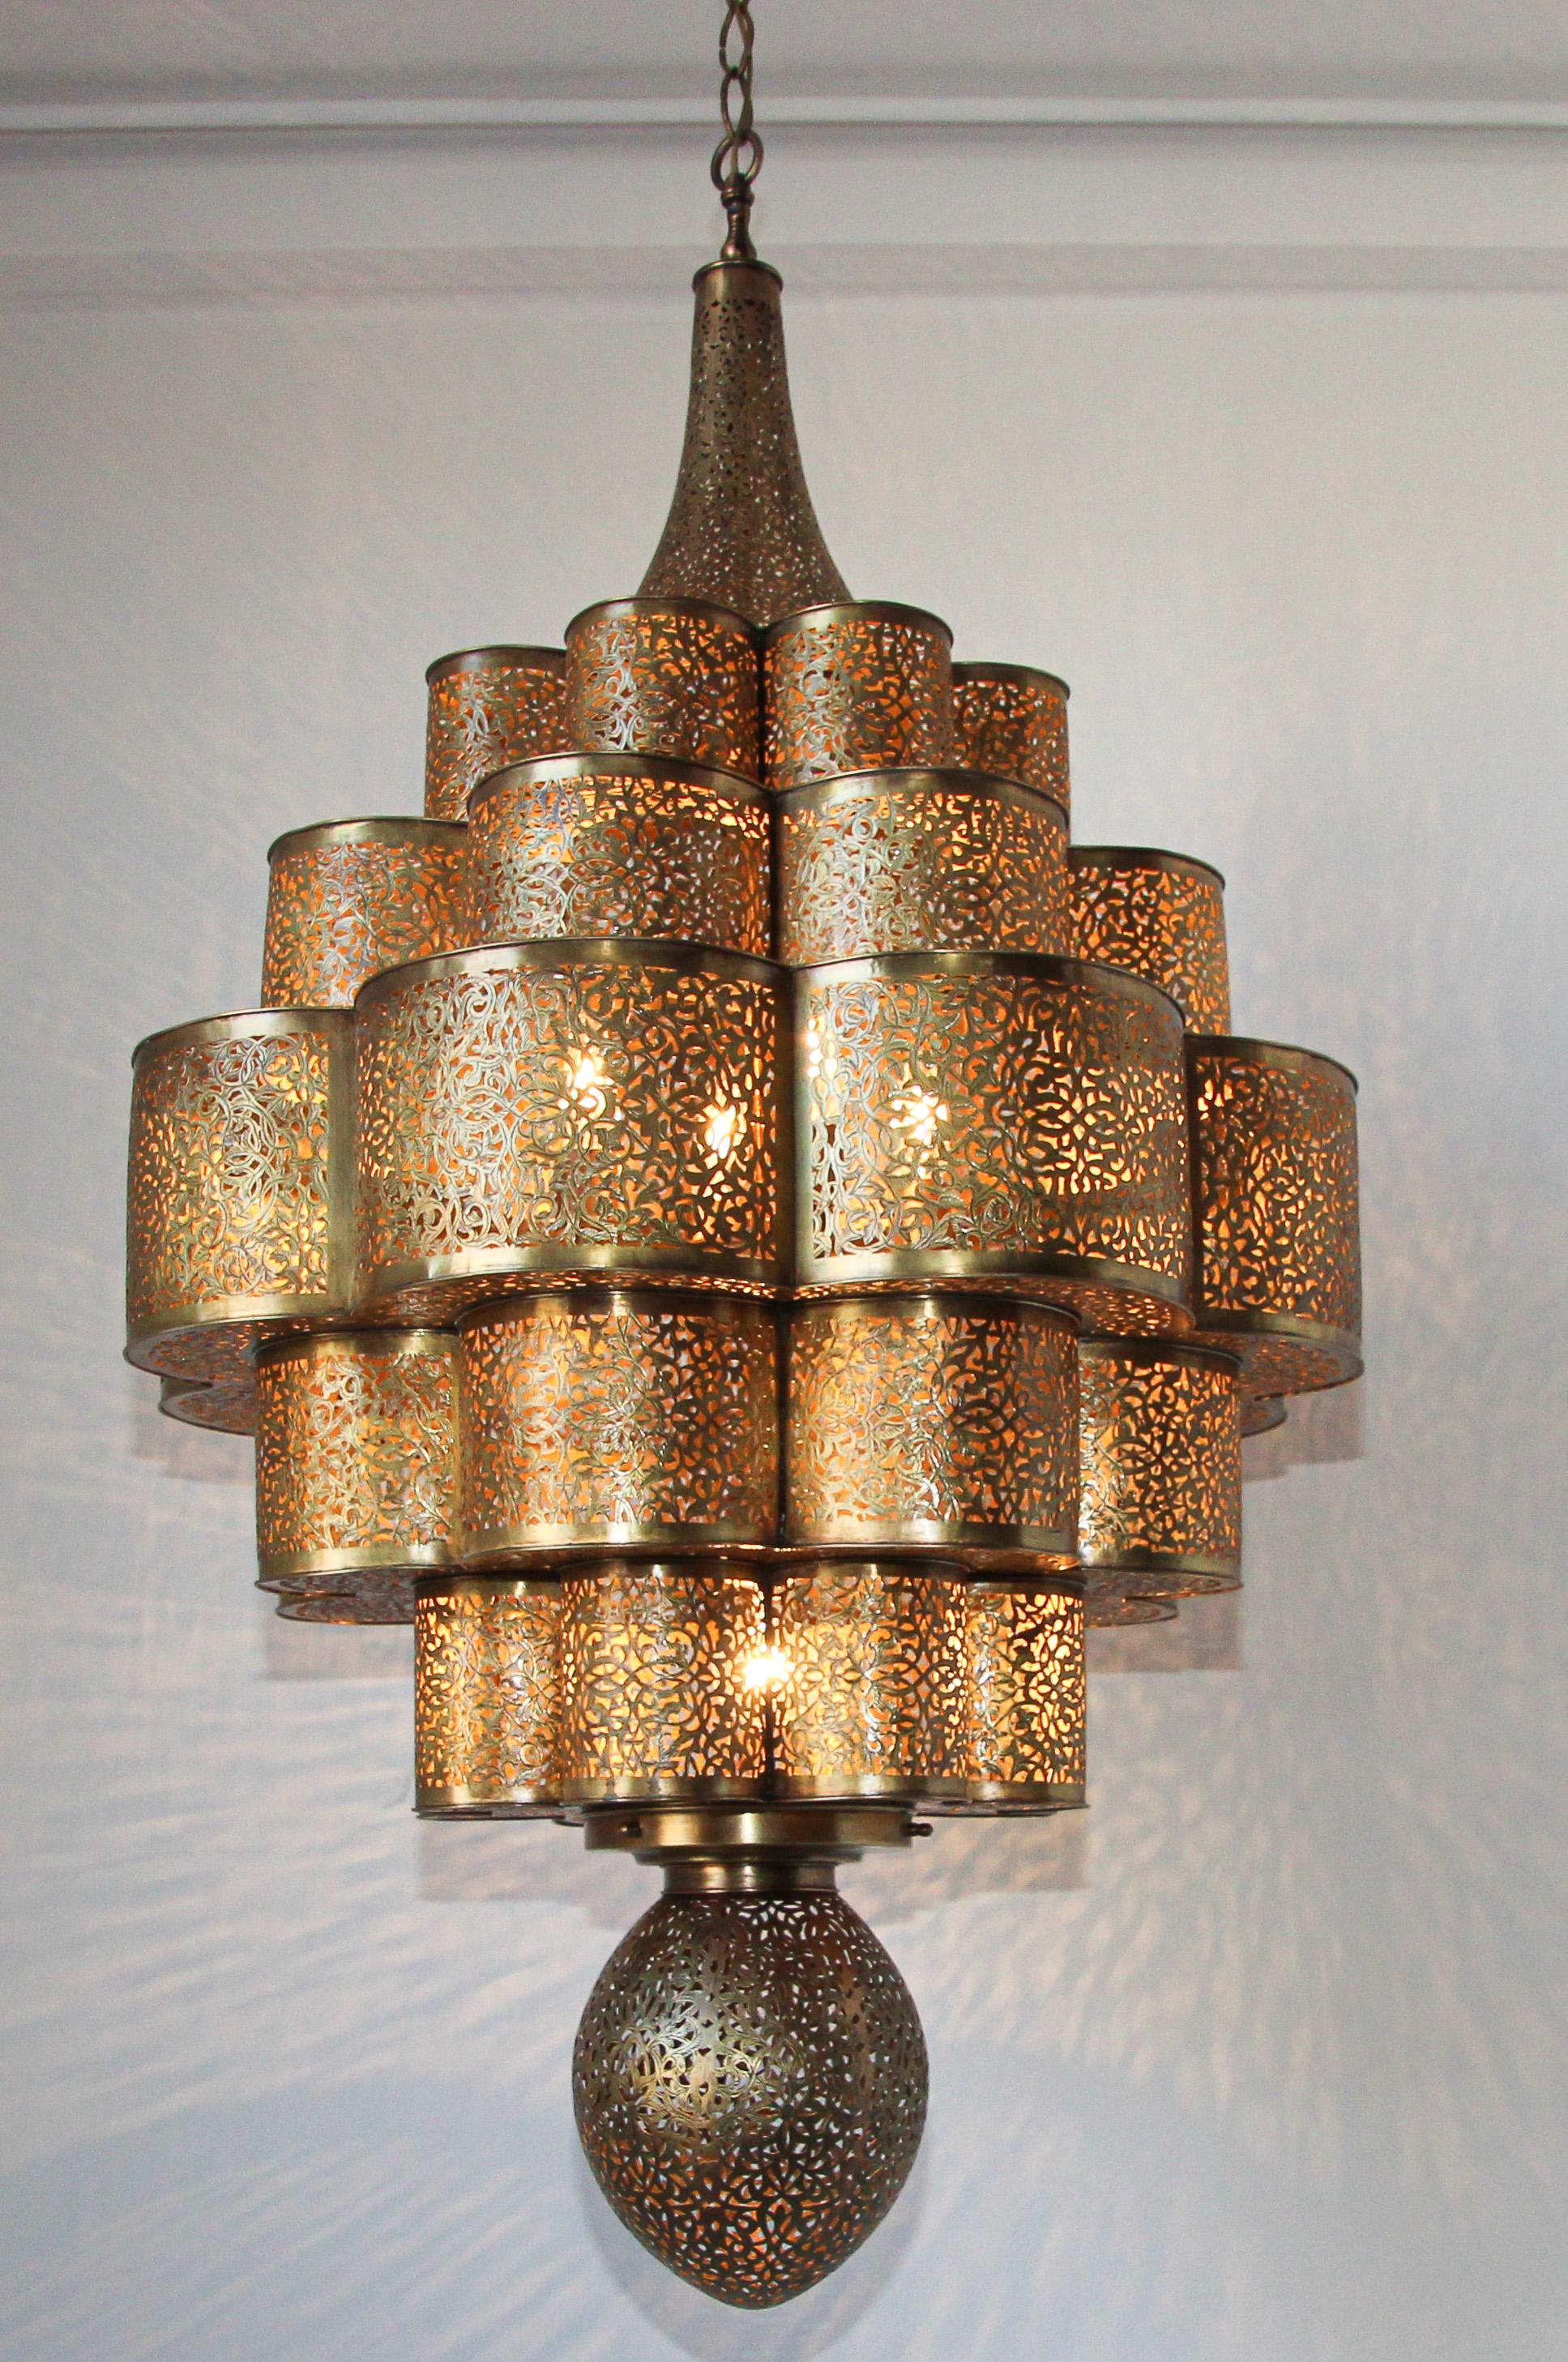 Fabulous finely handcrafted and hand chased Moroccan Moorish brass Alhambra hanging chandelier.
This Alhambra Moroccan chandelier is made of brass and delicately handcrafted, hand-chase, hand-hammered and chiseled, the brass become a Fine art like a